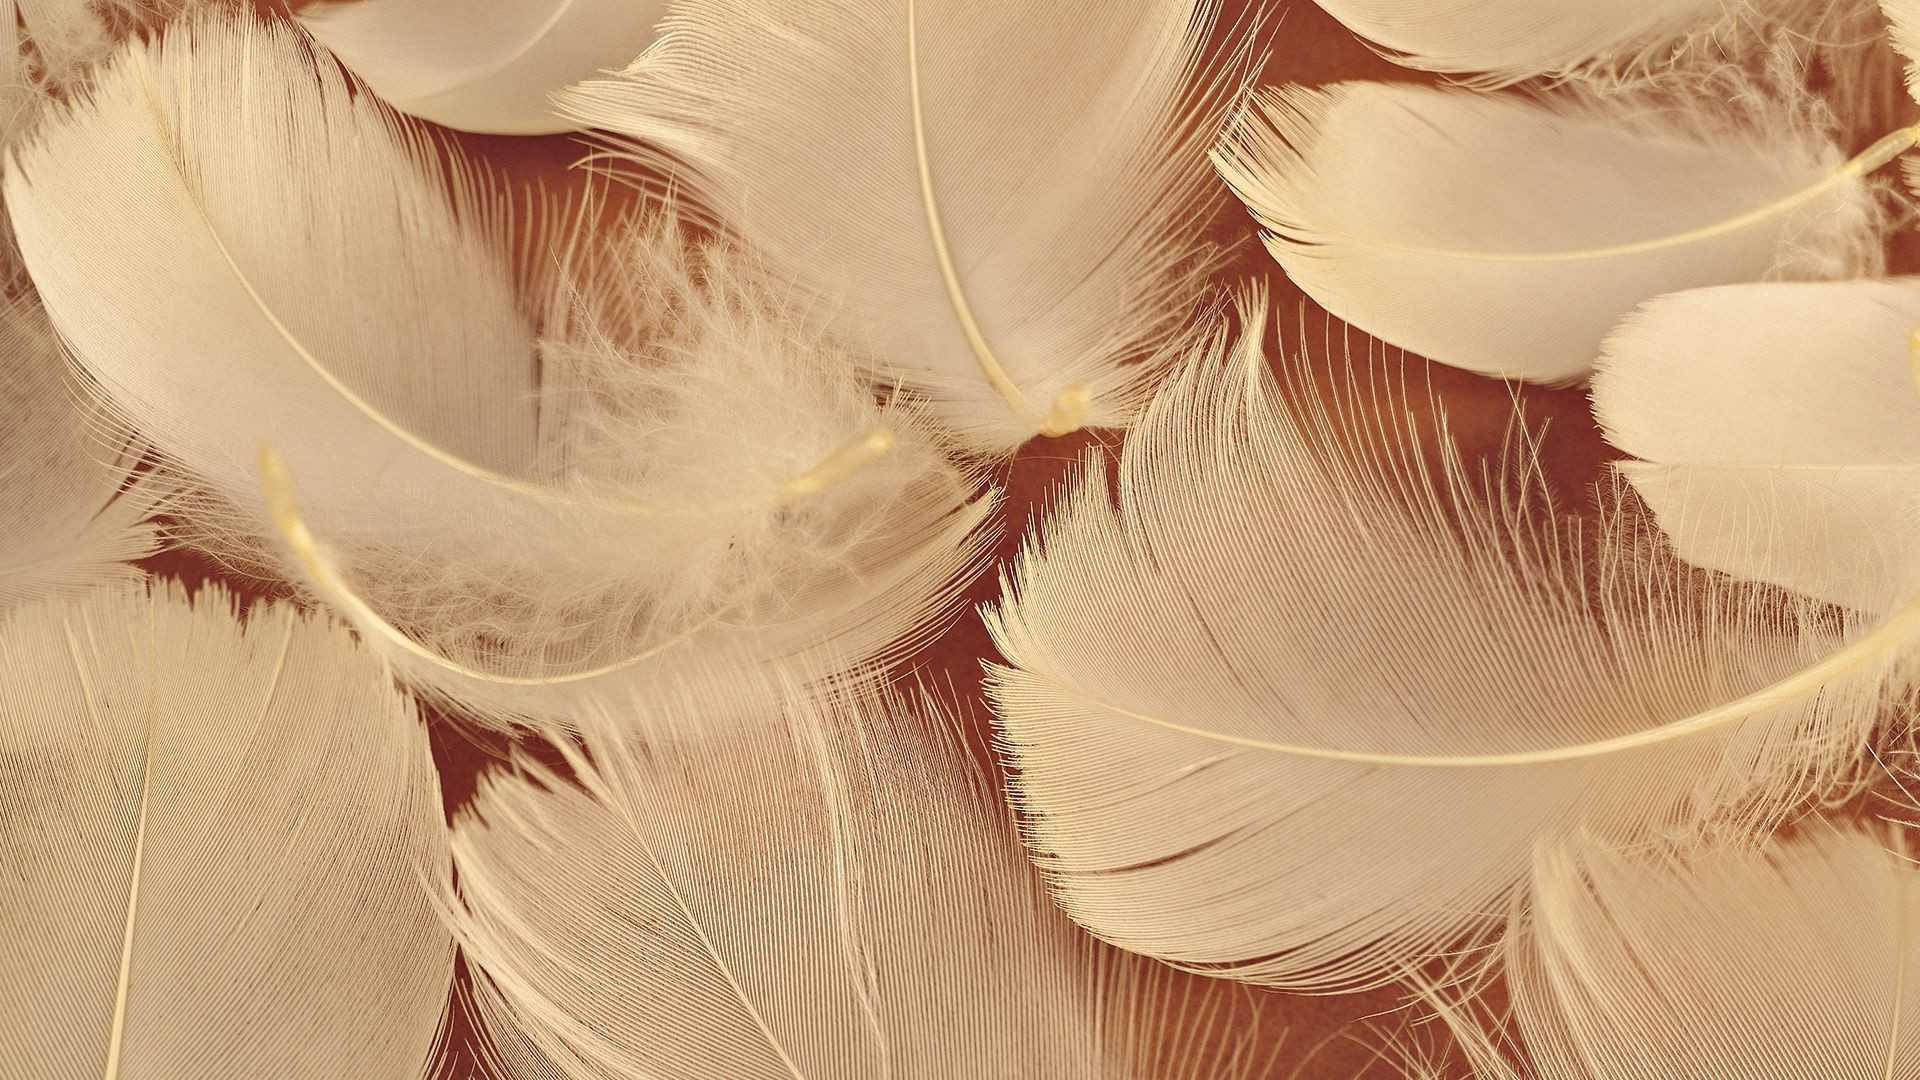 A lot of feathers in the picture - Feathers